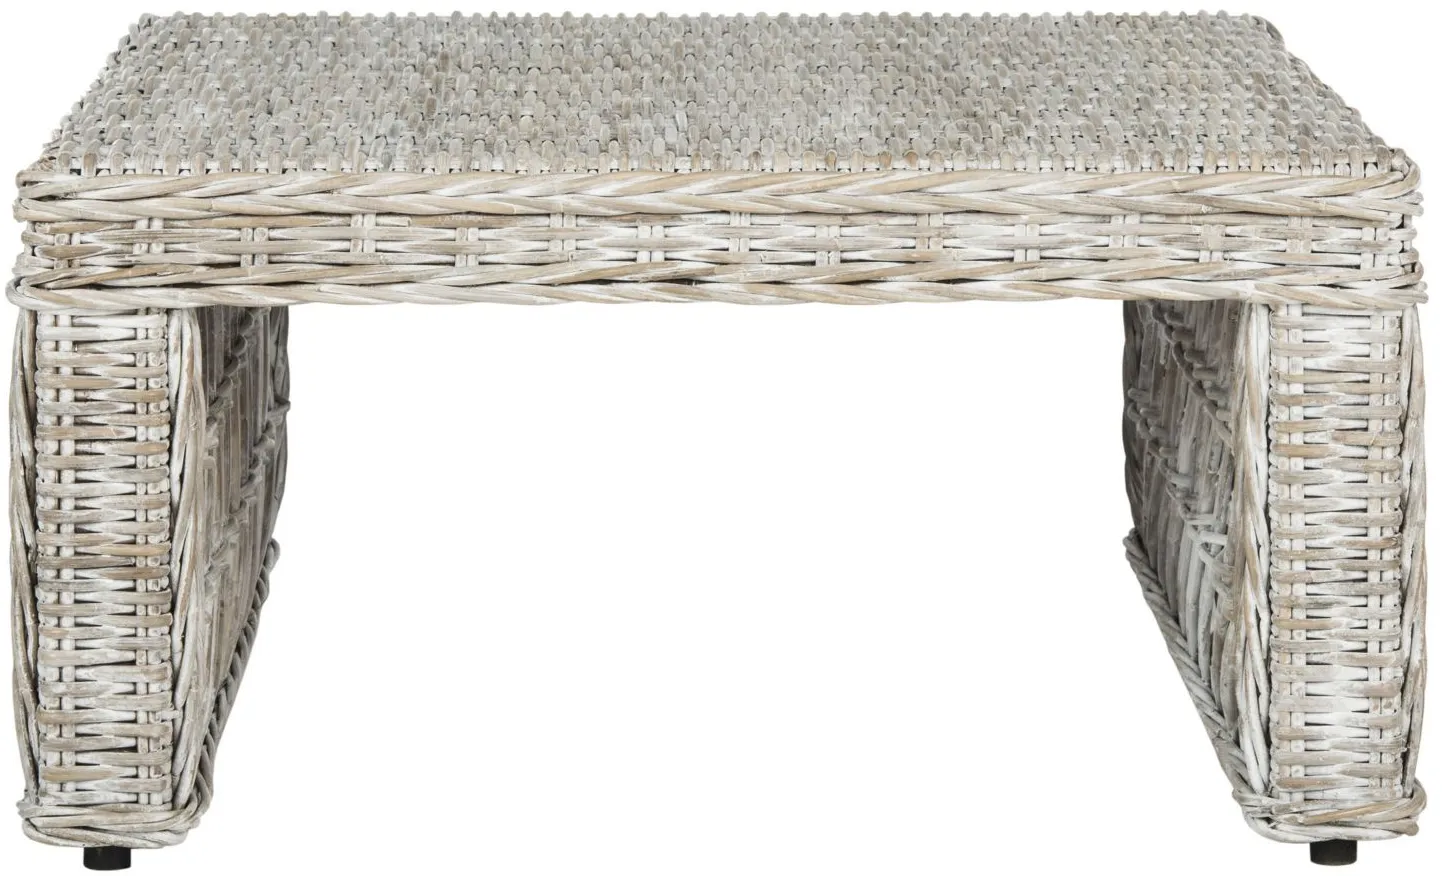 Dale Wicker Coffee Table in White Washed by Safavieh